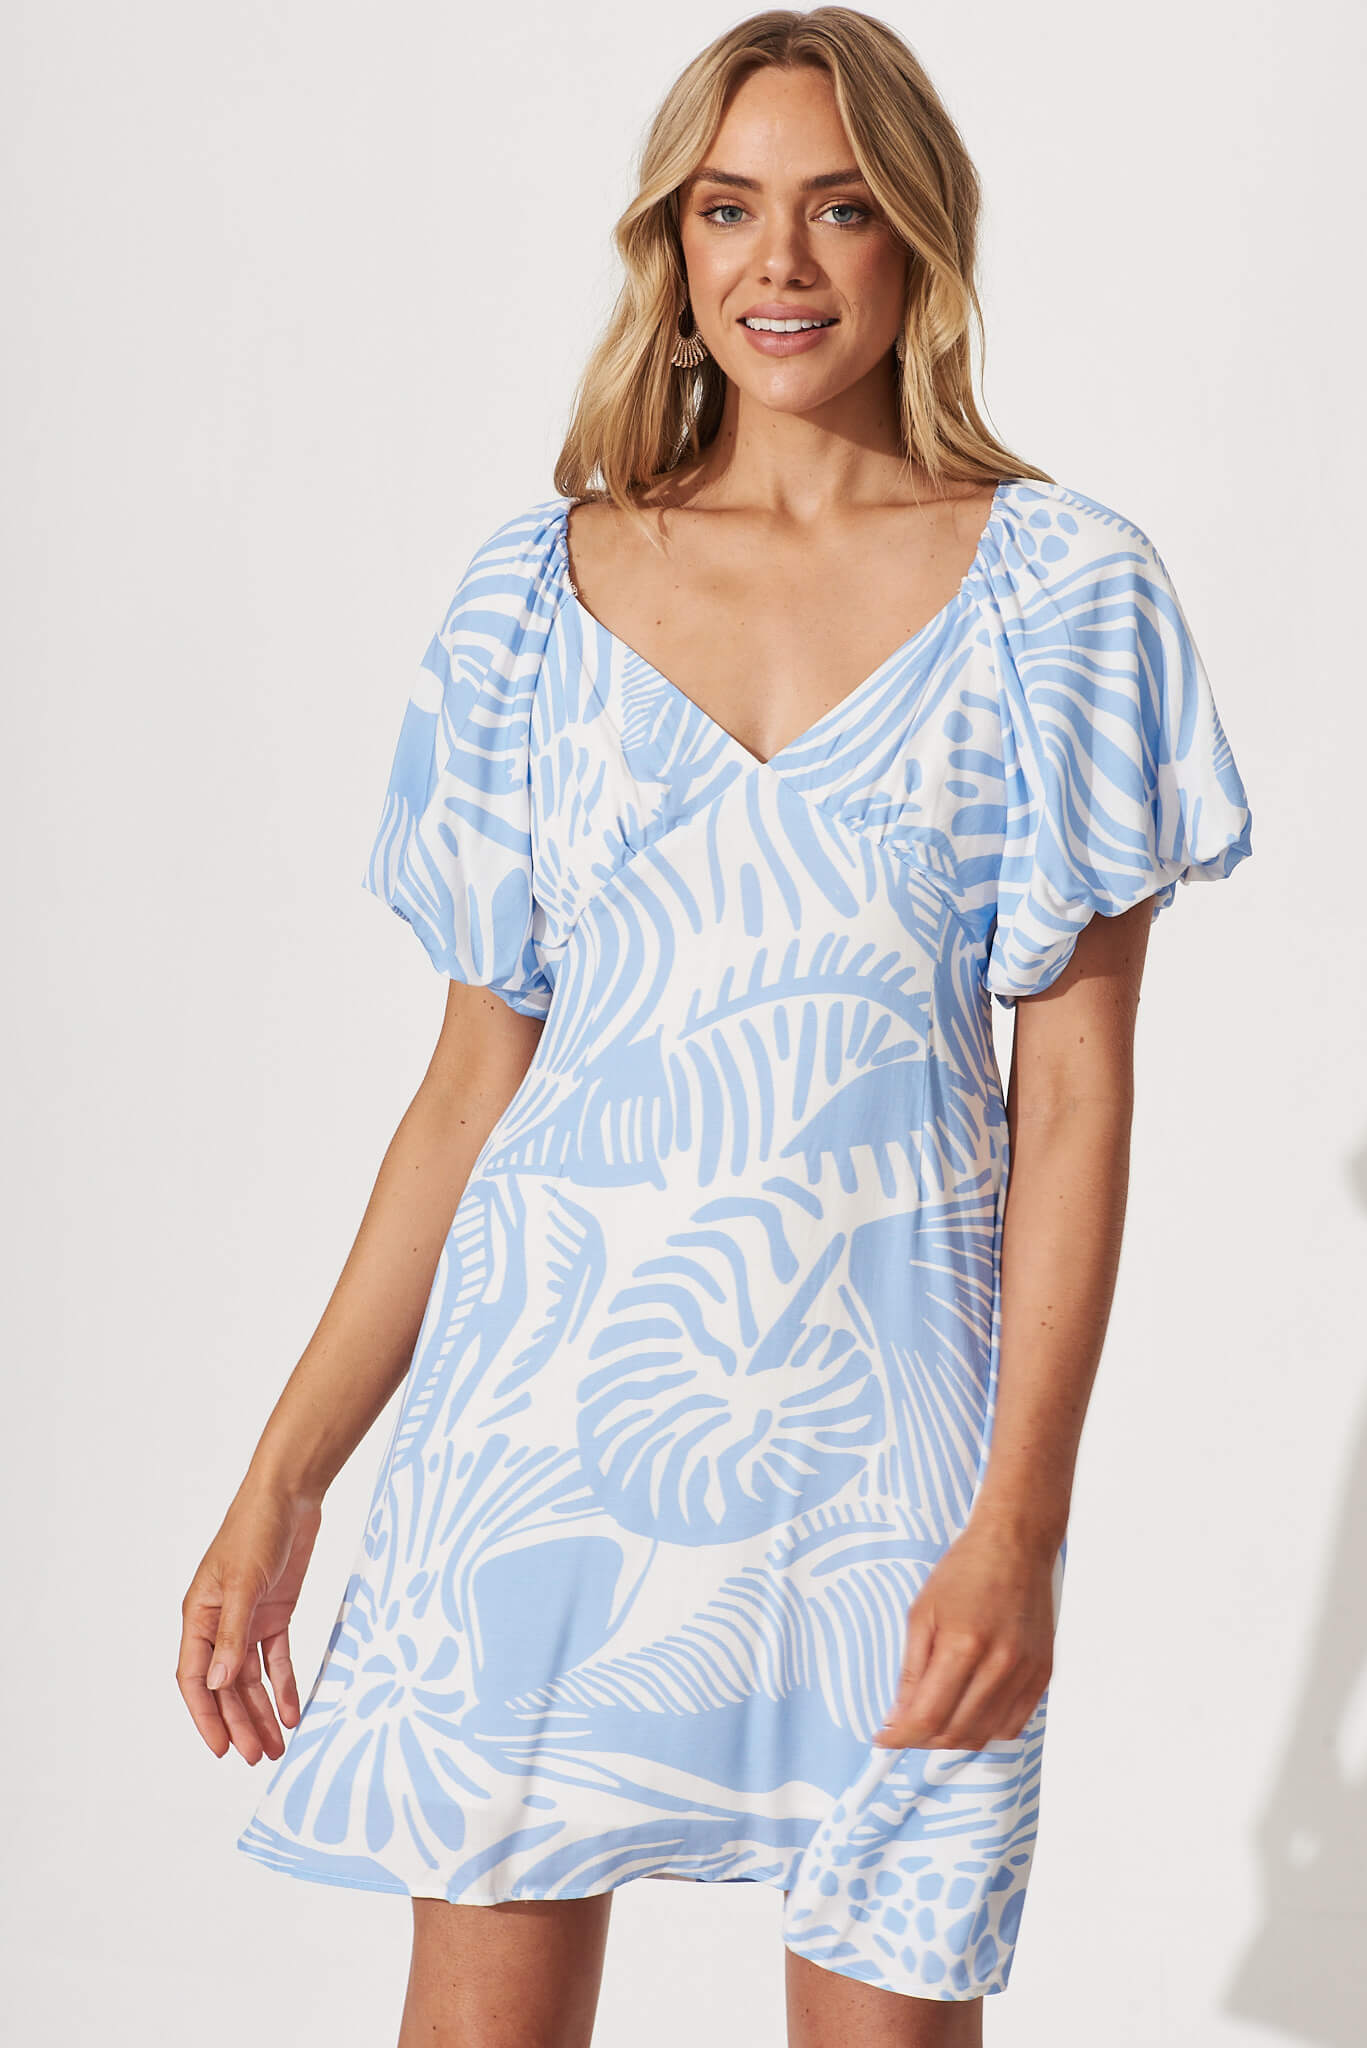 Whiteheaven Midi Dress In White With Blue Print Linen Blend - front